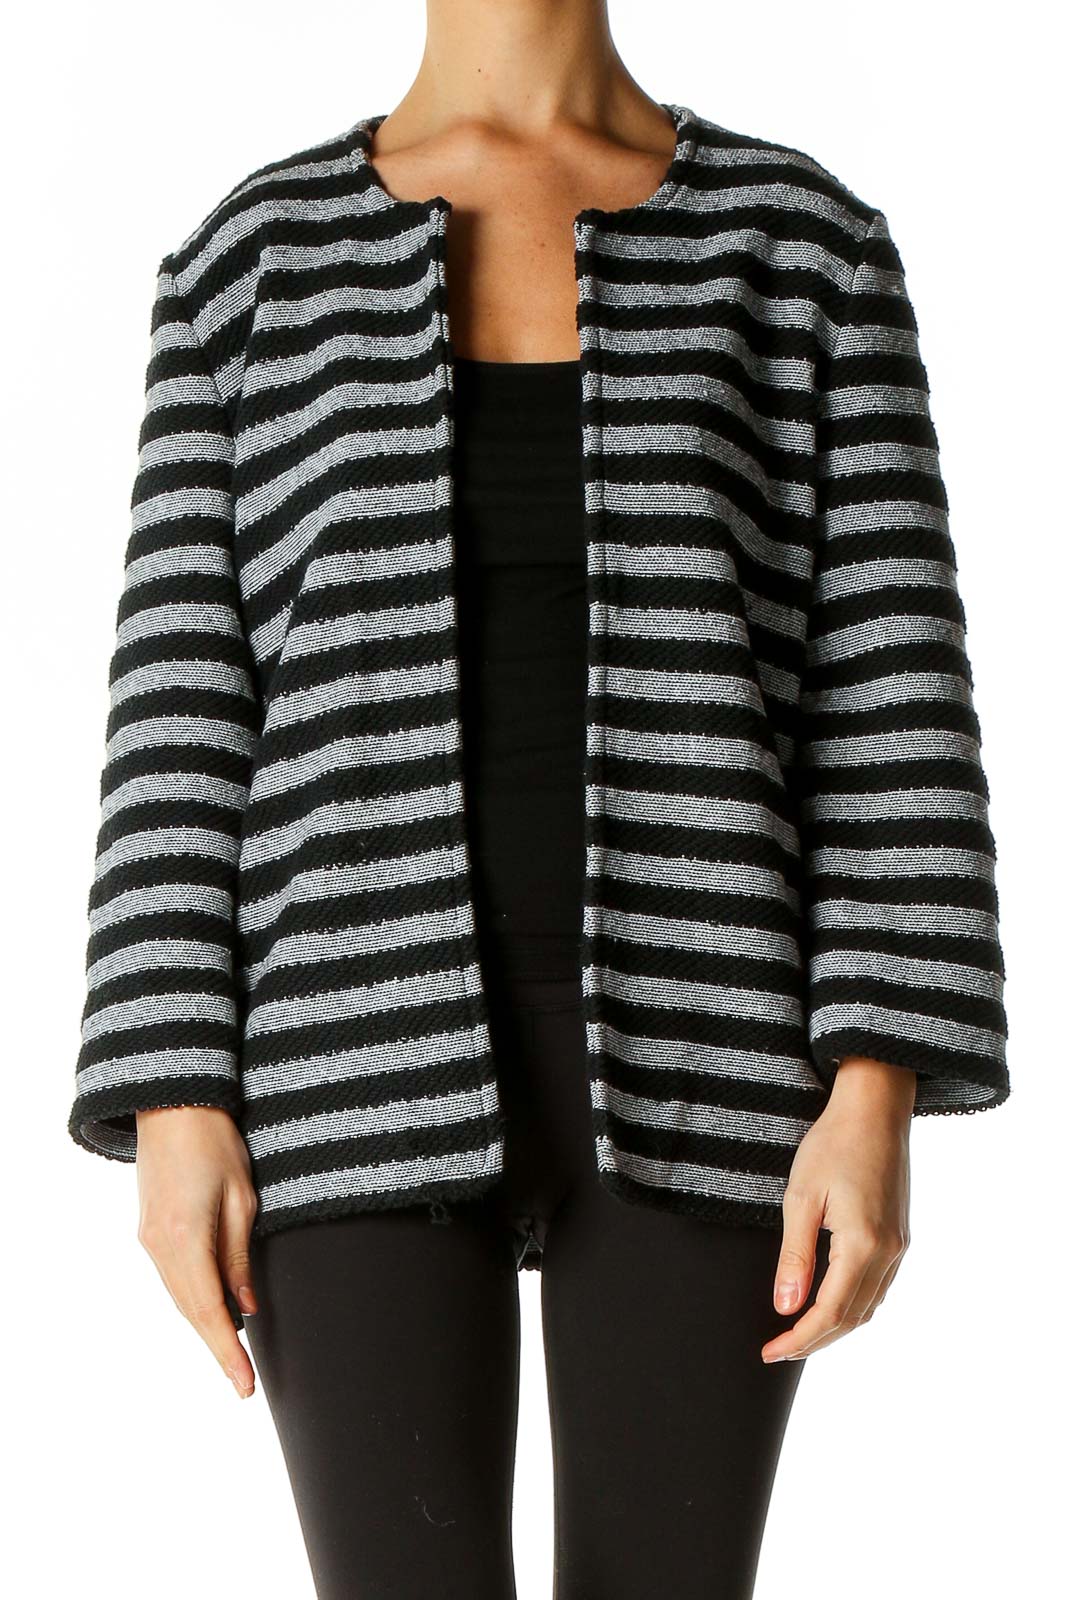 Black Grey Striped Sweater Front